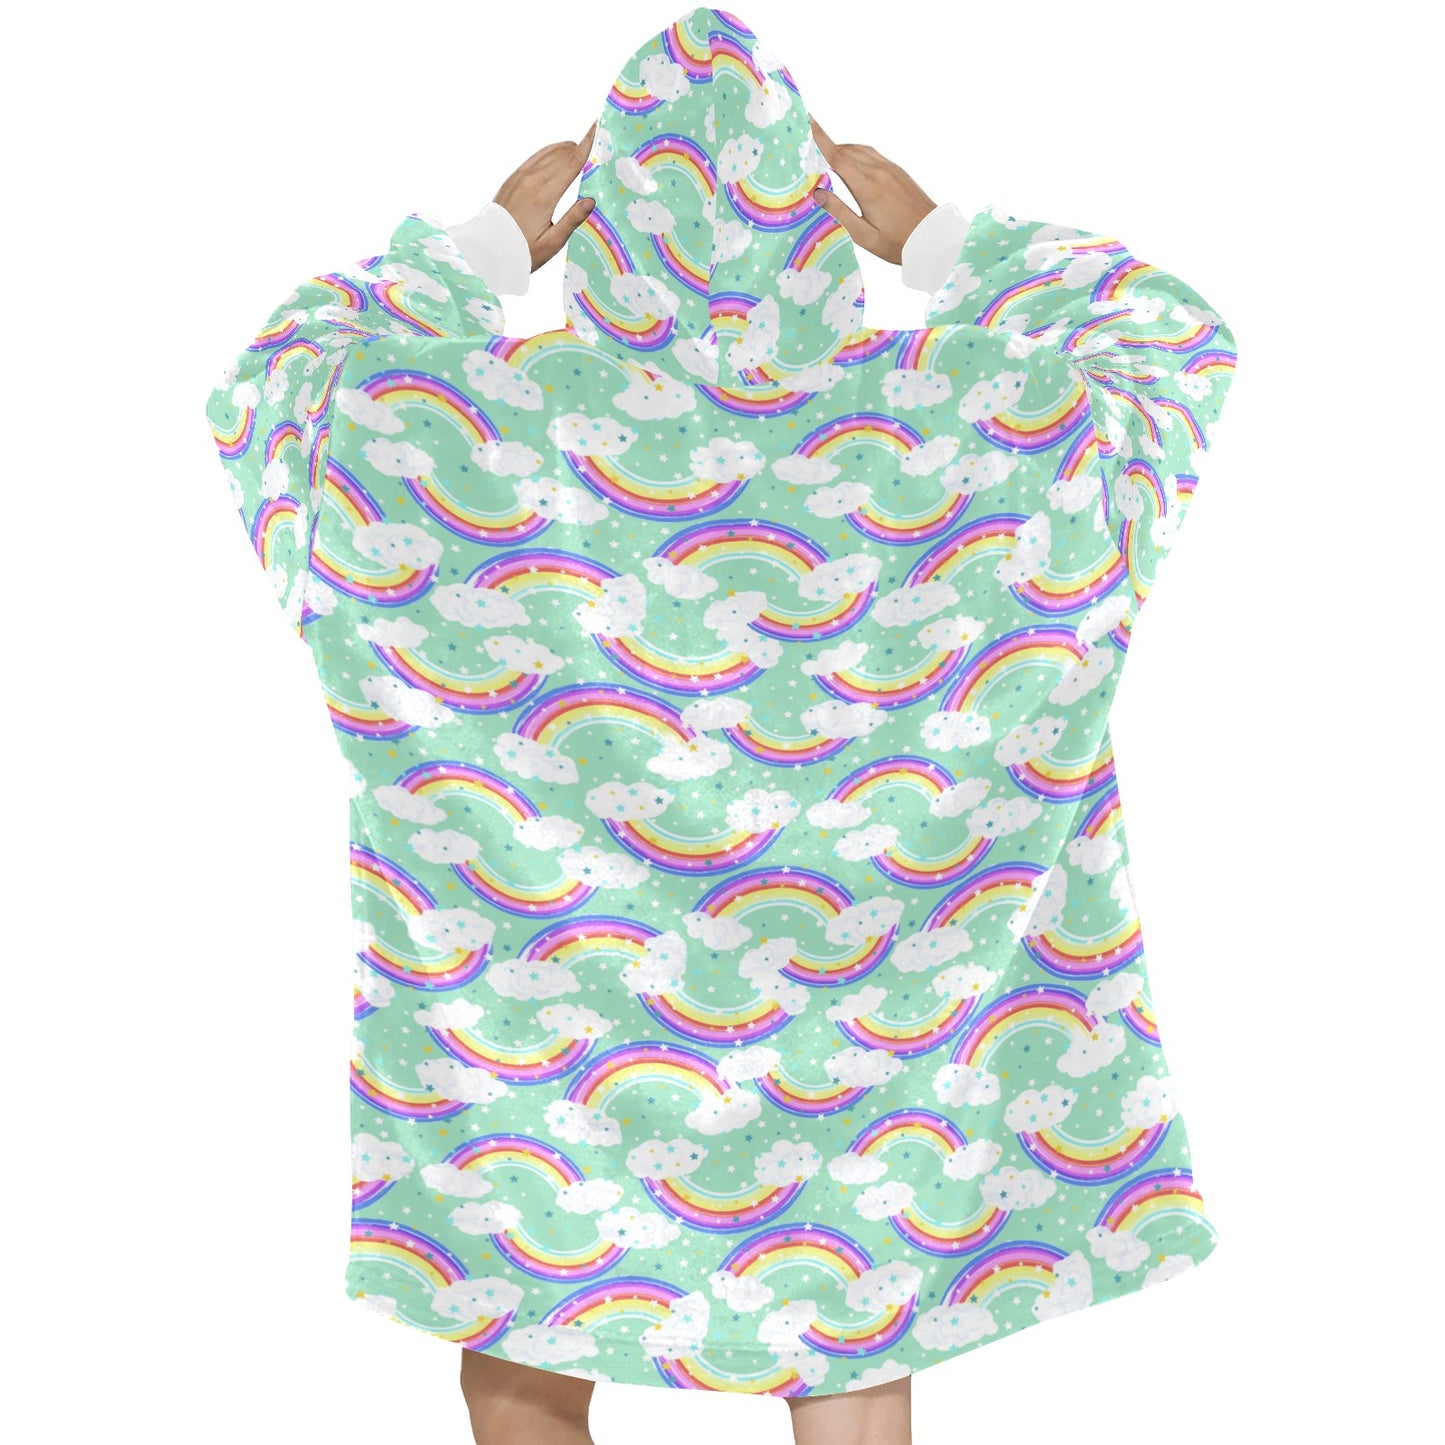 Green rainbow hooded fleece Oodie blanket - A cozy, vibrant fleece blanket with a hood featuring a green base and a colorful rainbow design.